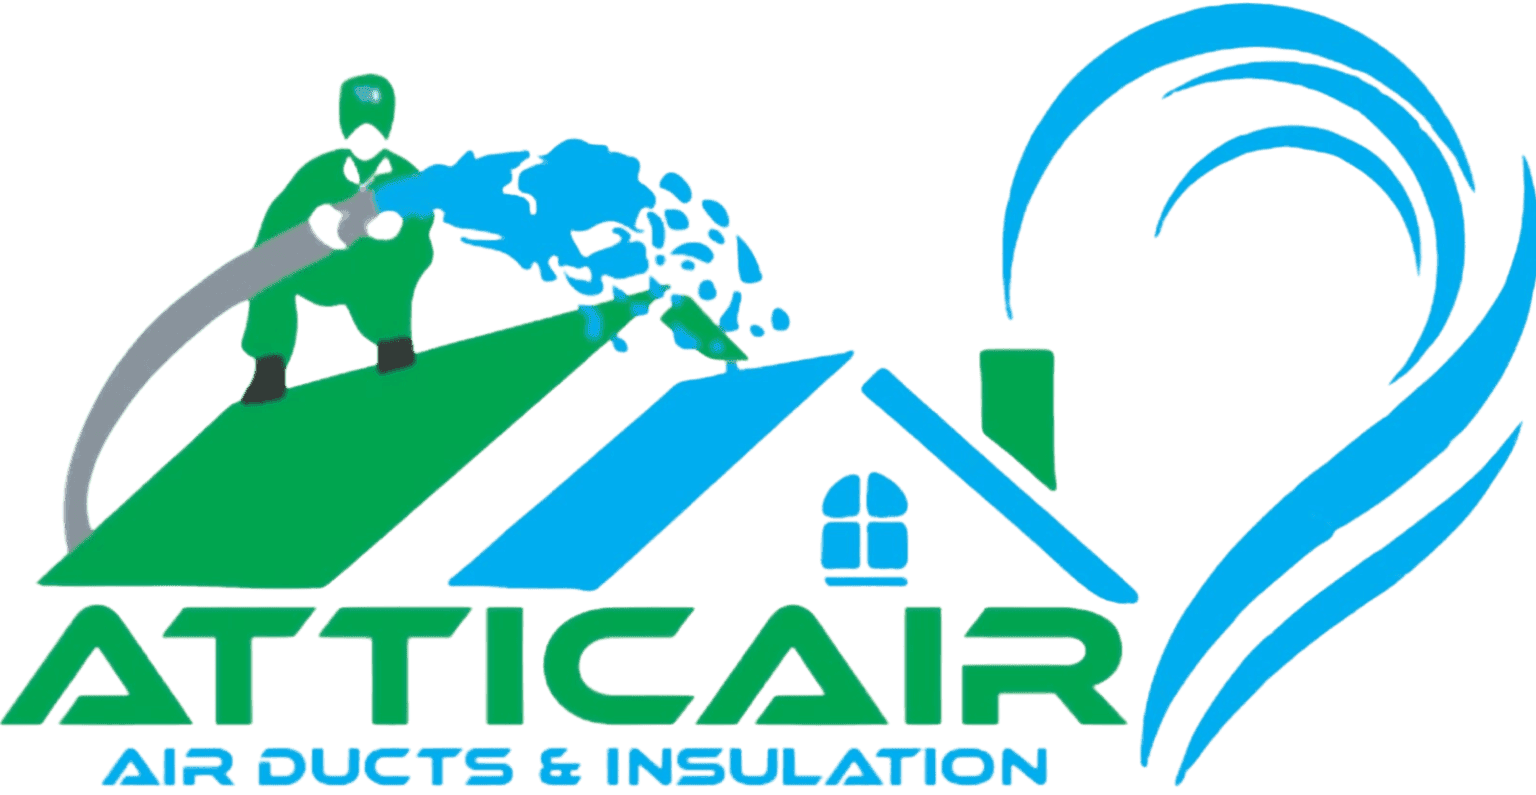 Attic Insulation in Houston TX | Atticair Ducts and Insulation